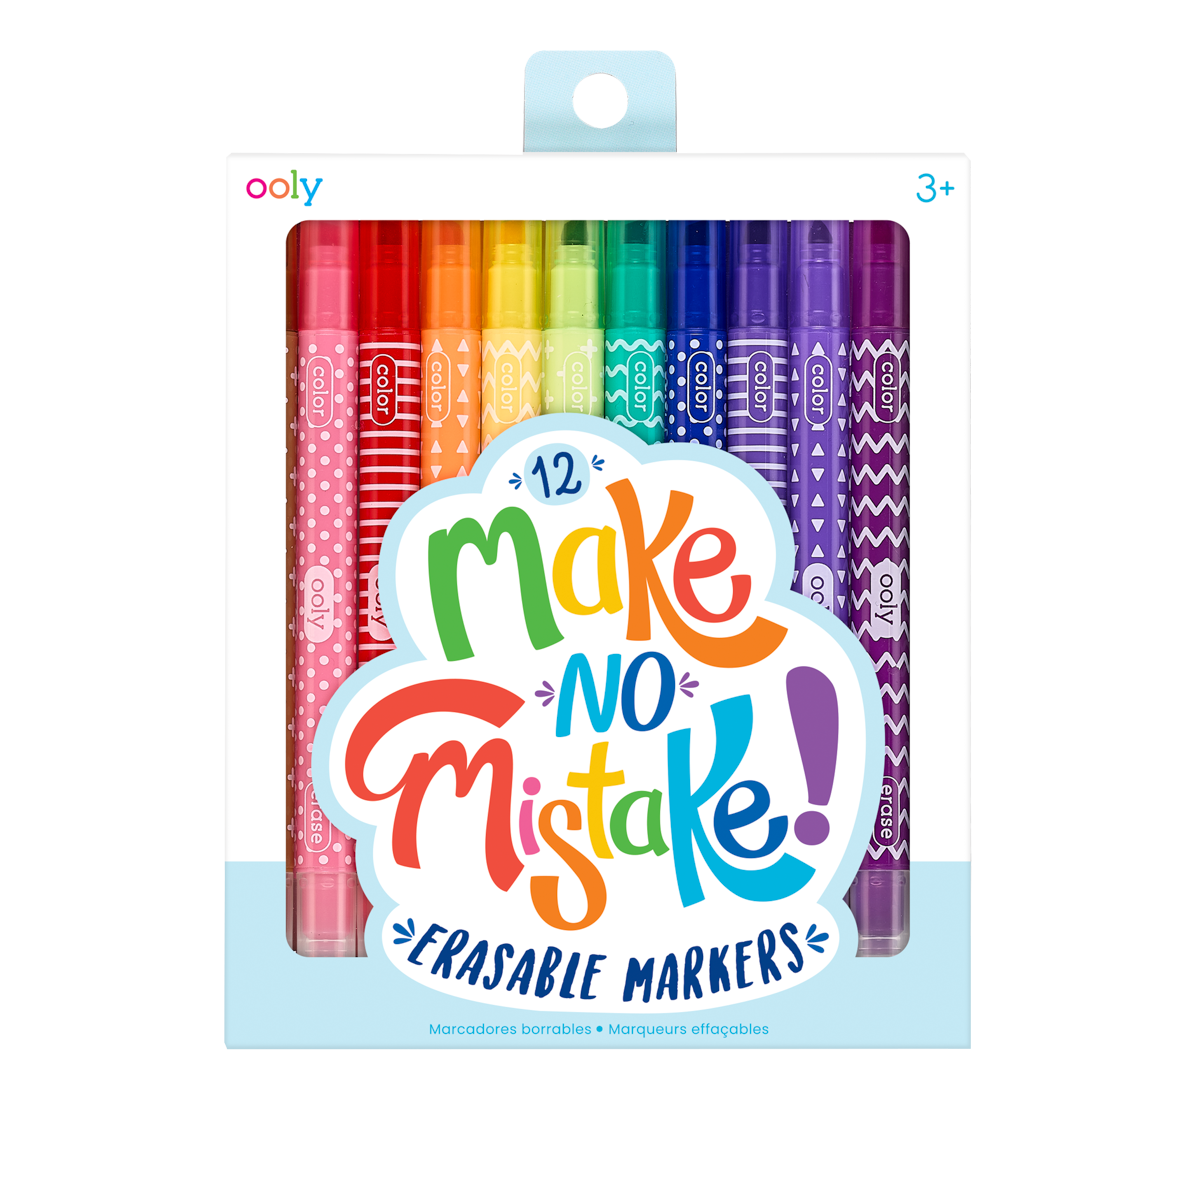 Ooly Thick Washable Markers with Jumbo Grip, Washable Toddler Markers,  Mighty Mega Triangle Tip Markers for Toddlers, Kids Markers Washable with  Jumbo Barrel, Markers for Little Hands [TRIANGLE TIP] - Yahoo Shopping